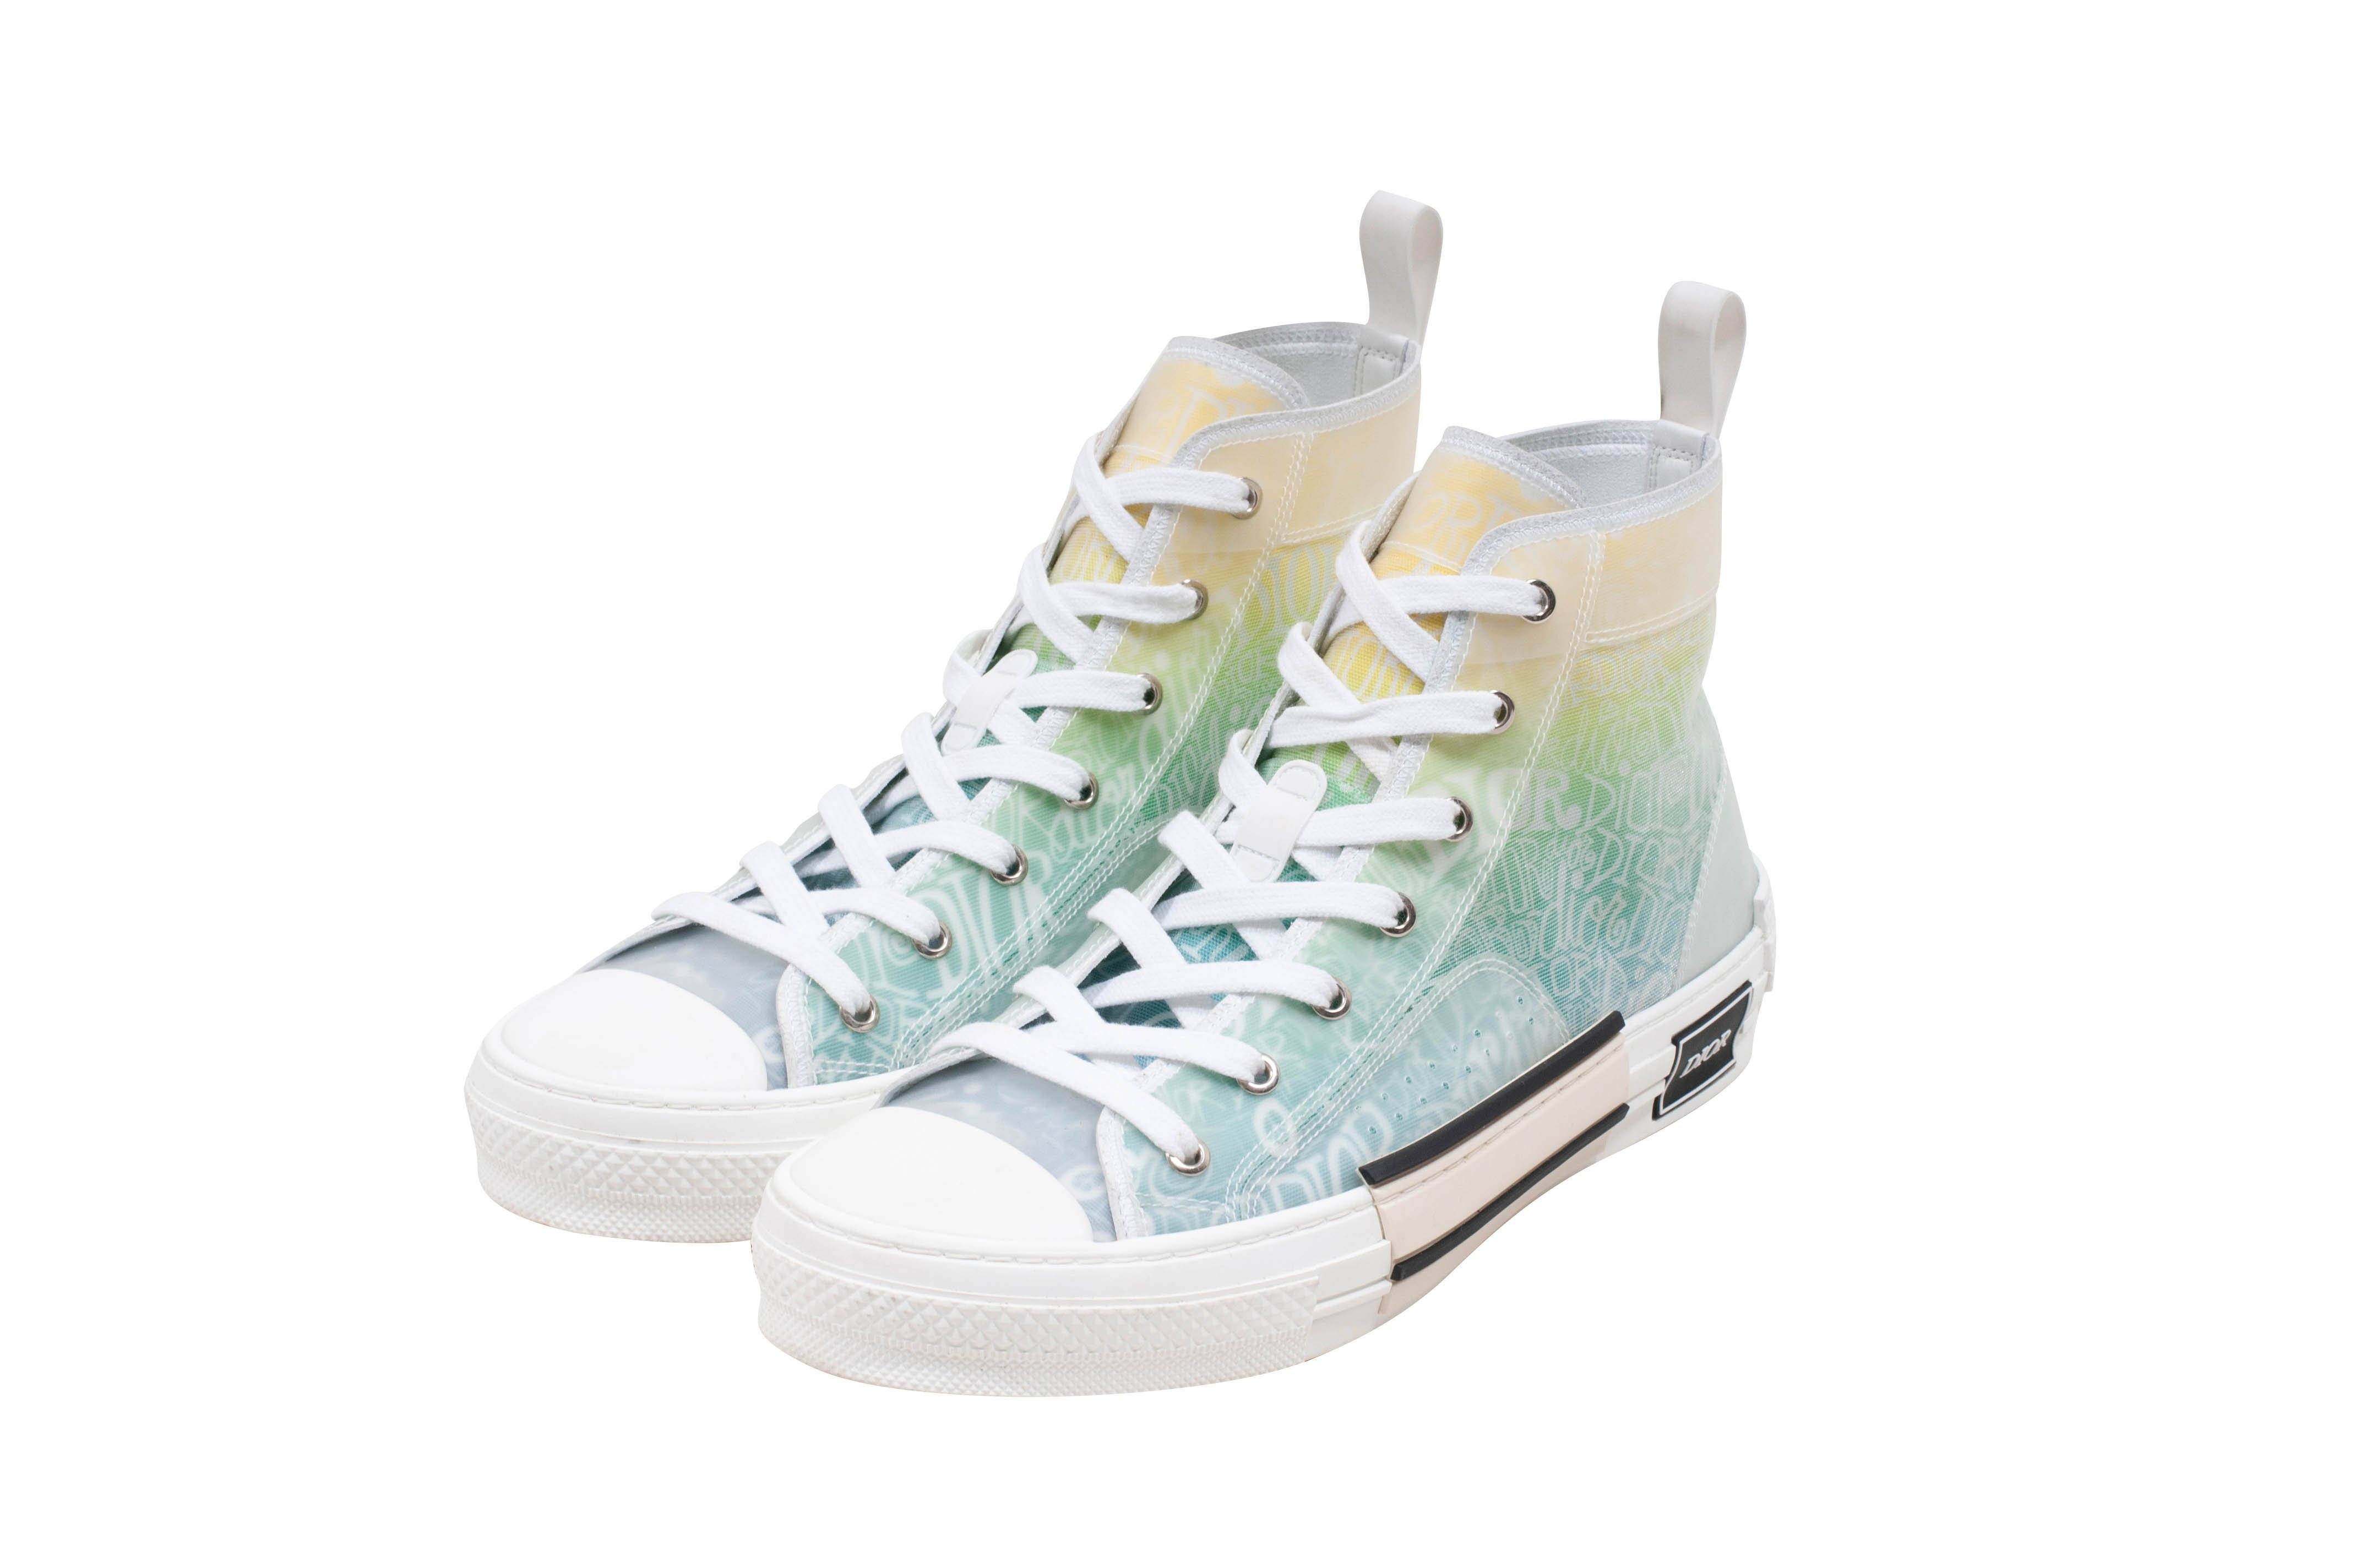 Dior Converse High Top Sneakers Size 22 CM